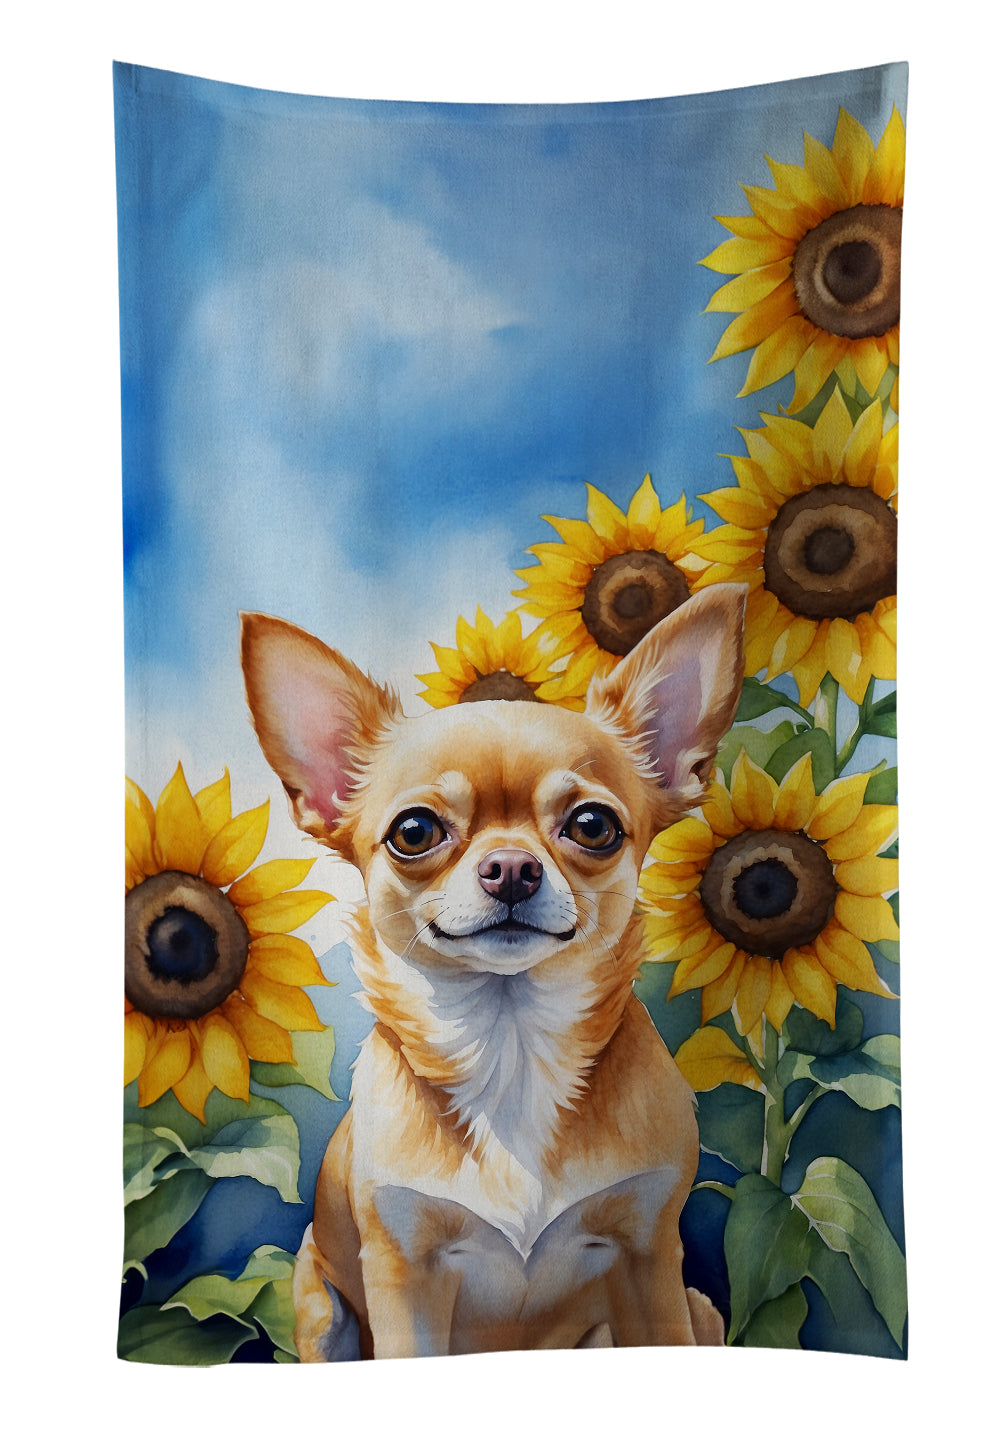 Buy this Chihuahua in Sunflowers Kitchen Towel